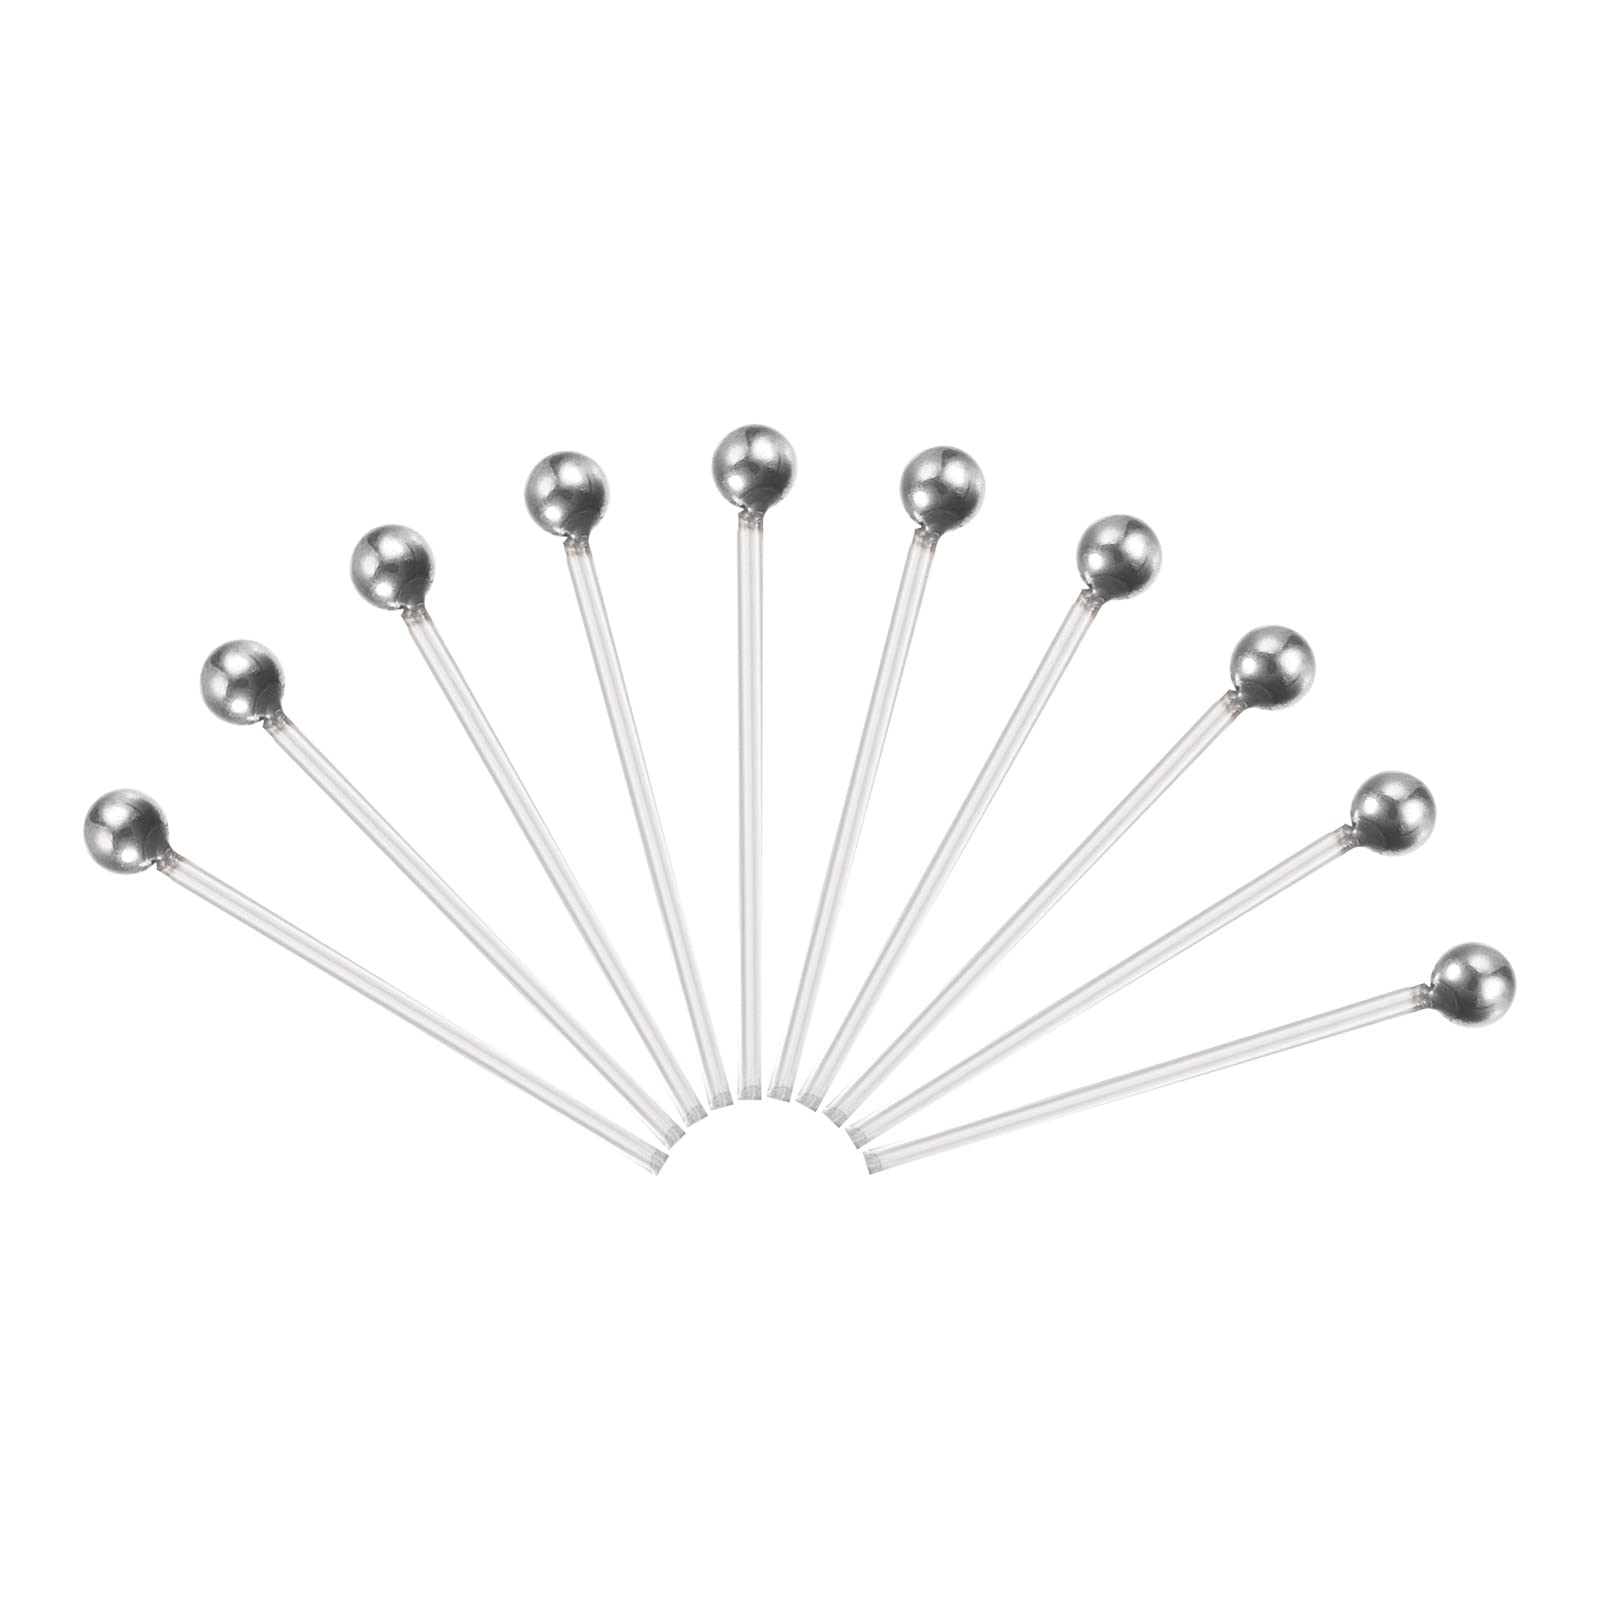 Crafto Combo of Golden & Silver Finished Head Pins for Jewellery Making/Findings  Pack of 200 Pcs. each - Combo of Golden & Silver Finished Head Pins for Jewellery  Making/Findings Pack of 200